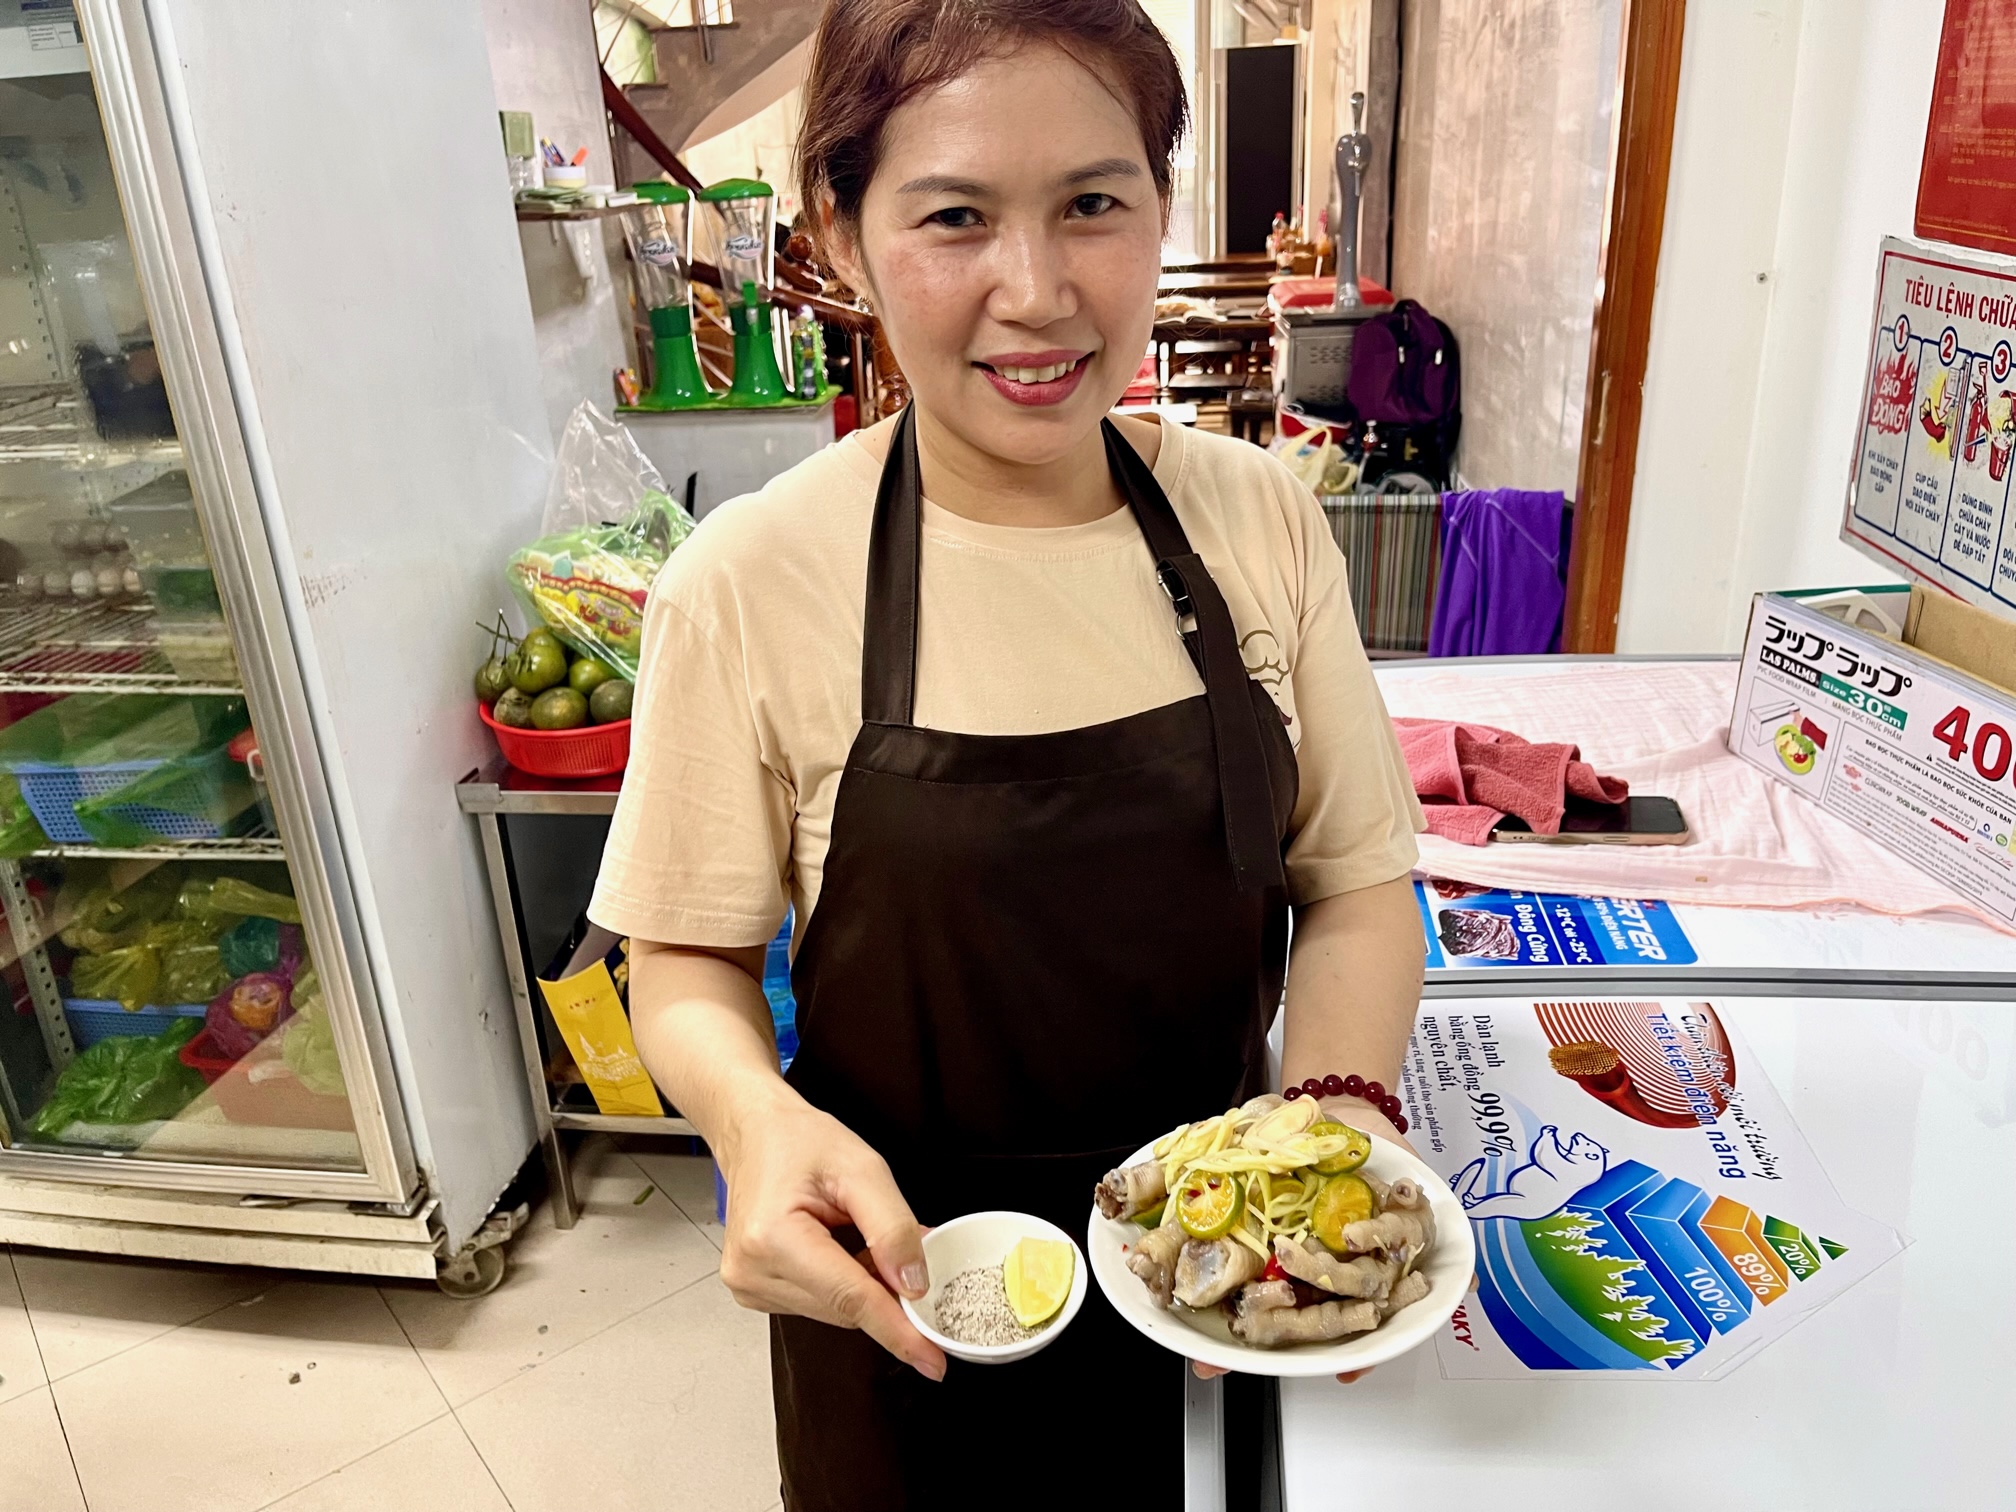 A woman serves 'chan ga sa tac' (boiled chicken feet topped with lemongrass shards and kumquat) at a shop in Phu Nhuan District in Ho Chi Minh City, Vietnam. Photo: Jordy Comes Alive